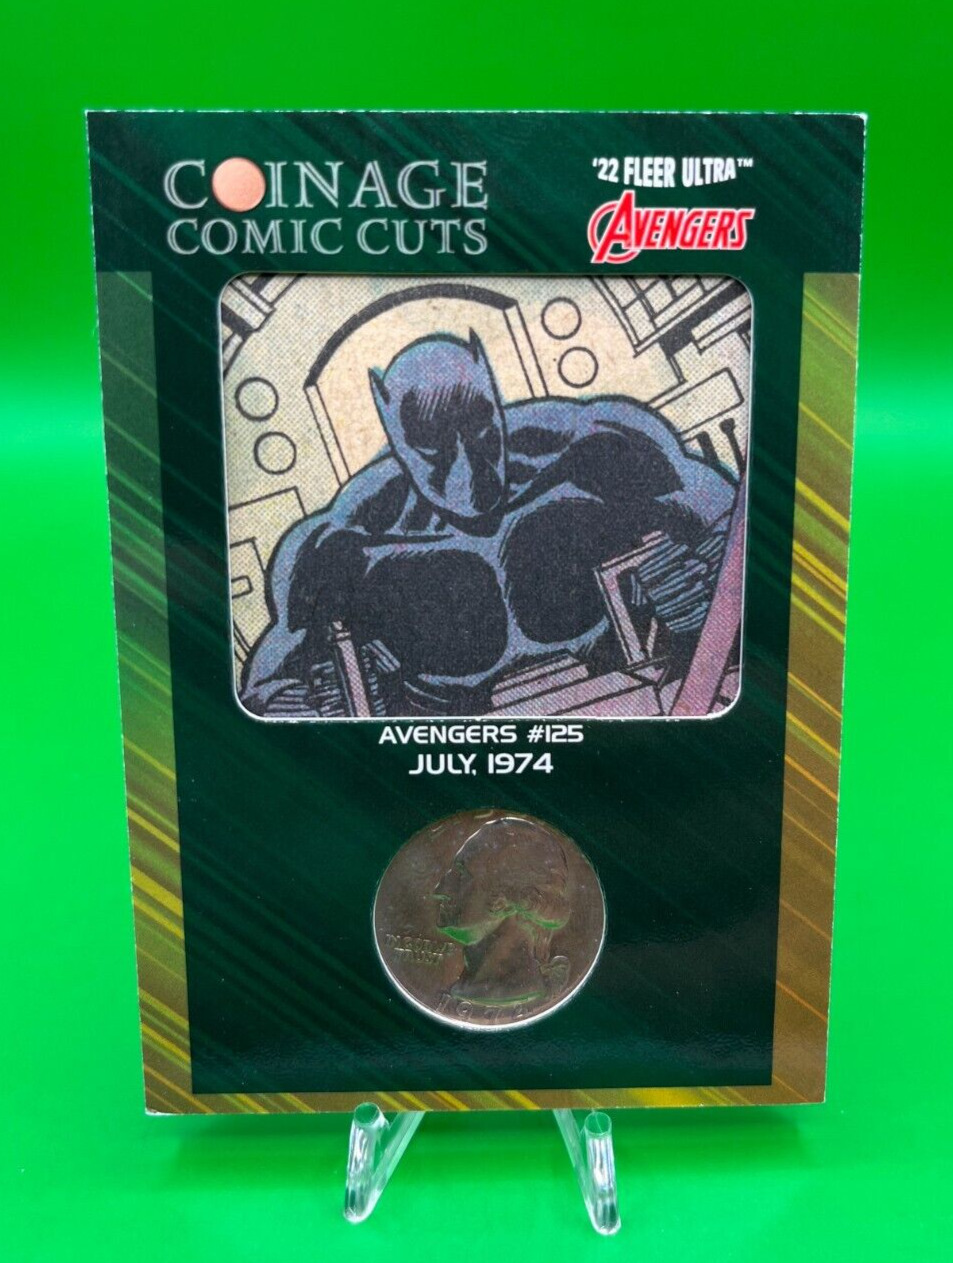 ⚡️❄️ 2022 Fleer Ultra Coin Age Comic Cuts #/25 Black Panther US Quarter 1974